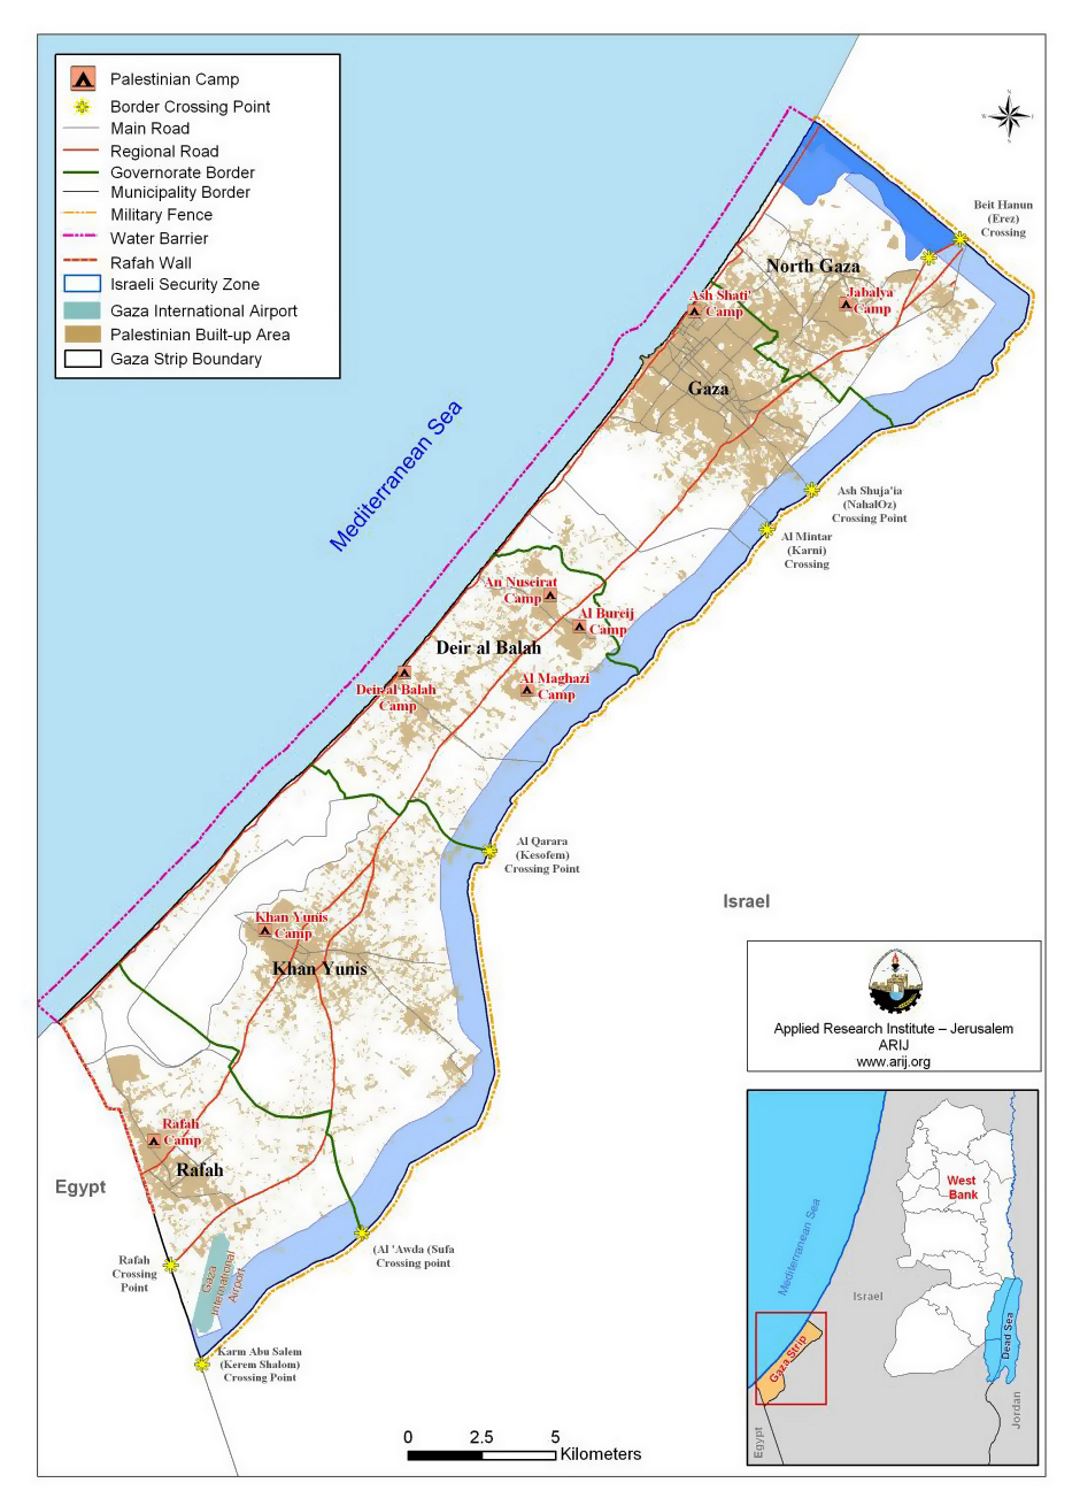 Map of Gaza Strip with other marks